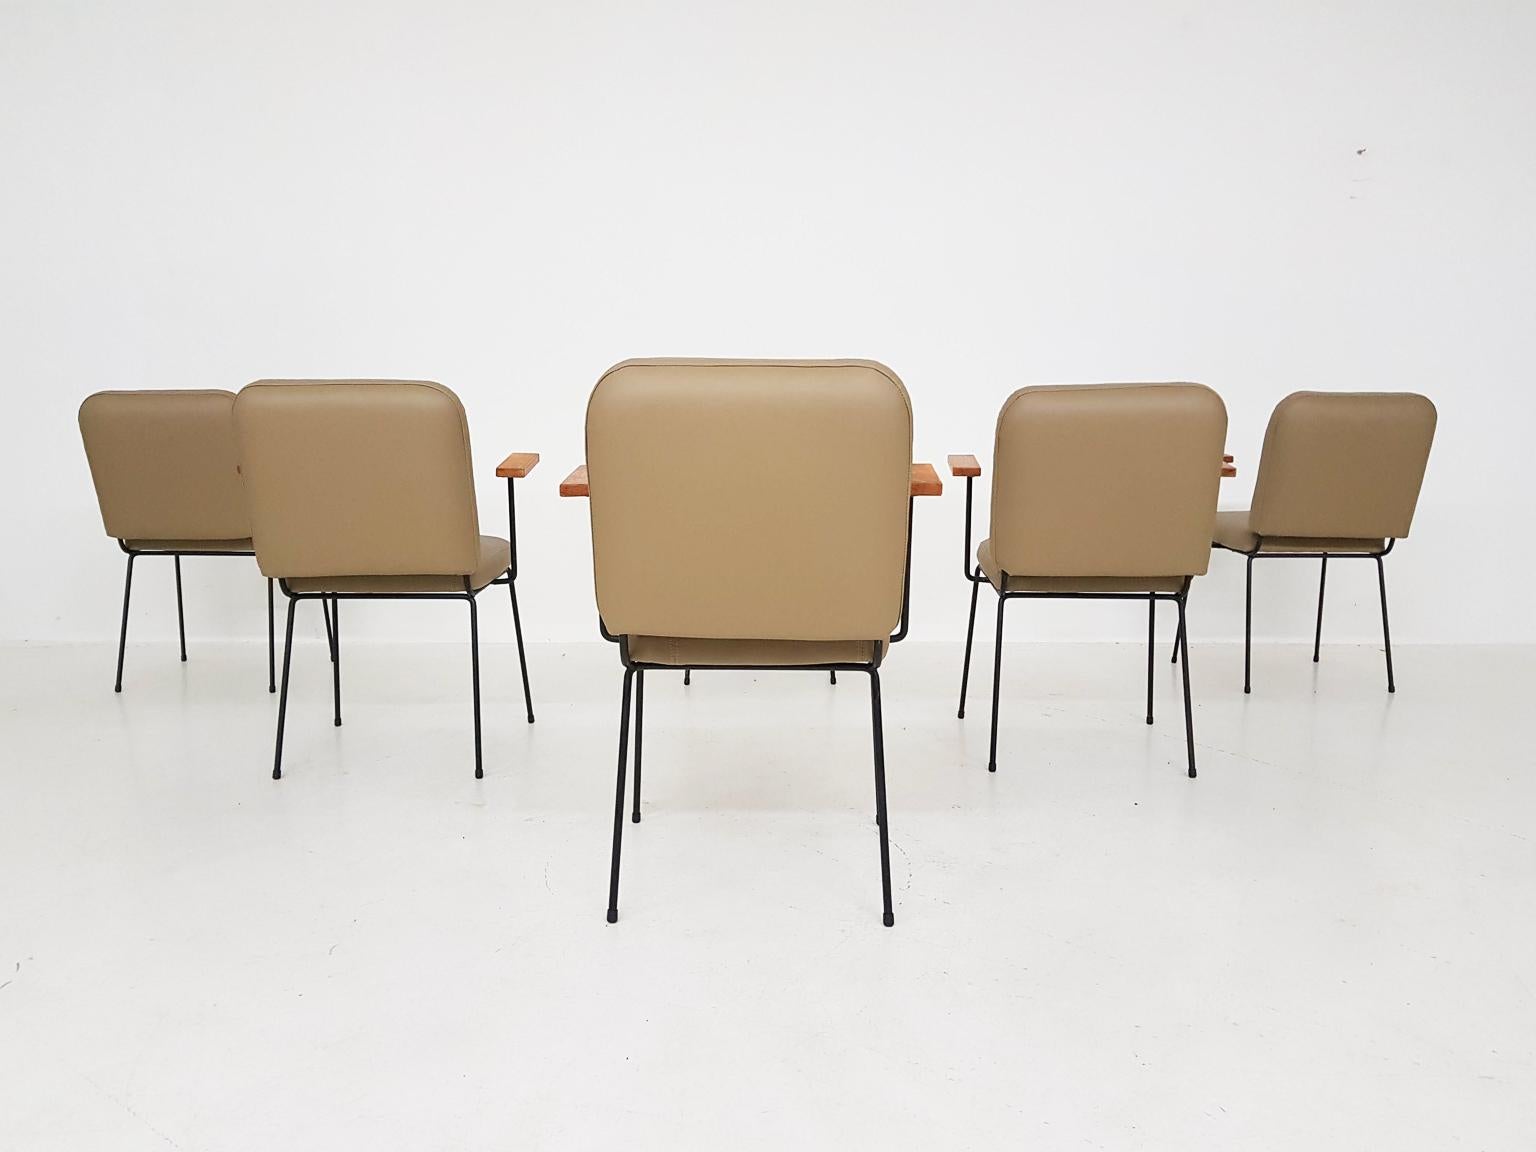 Dutch Set of 6 Bistro or Dining Chairs in Beige Leatherette, Europe, 1960s